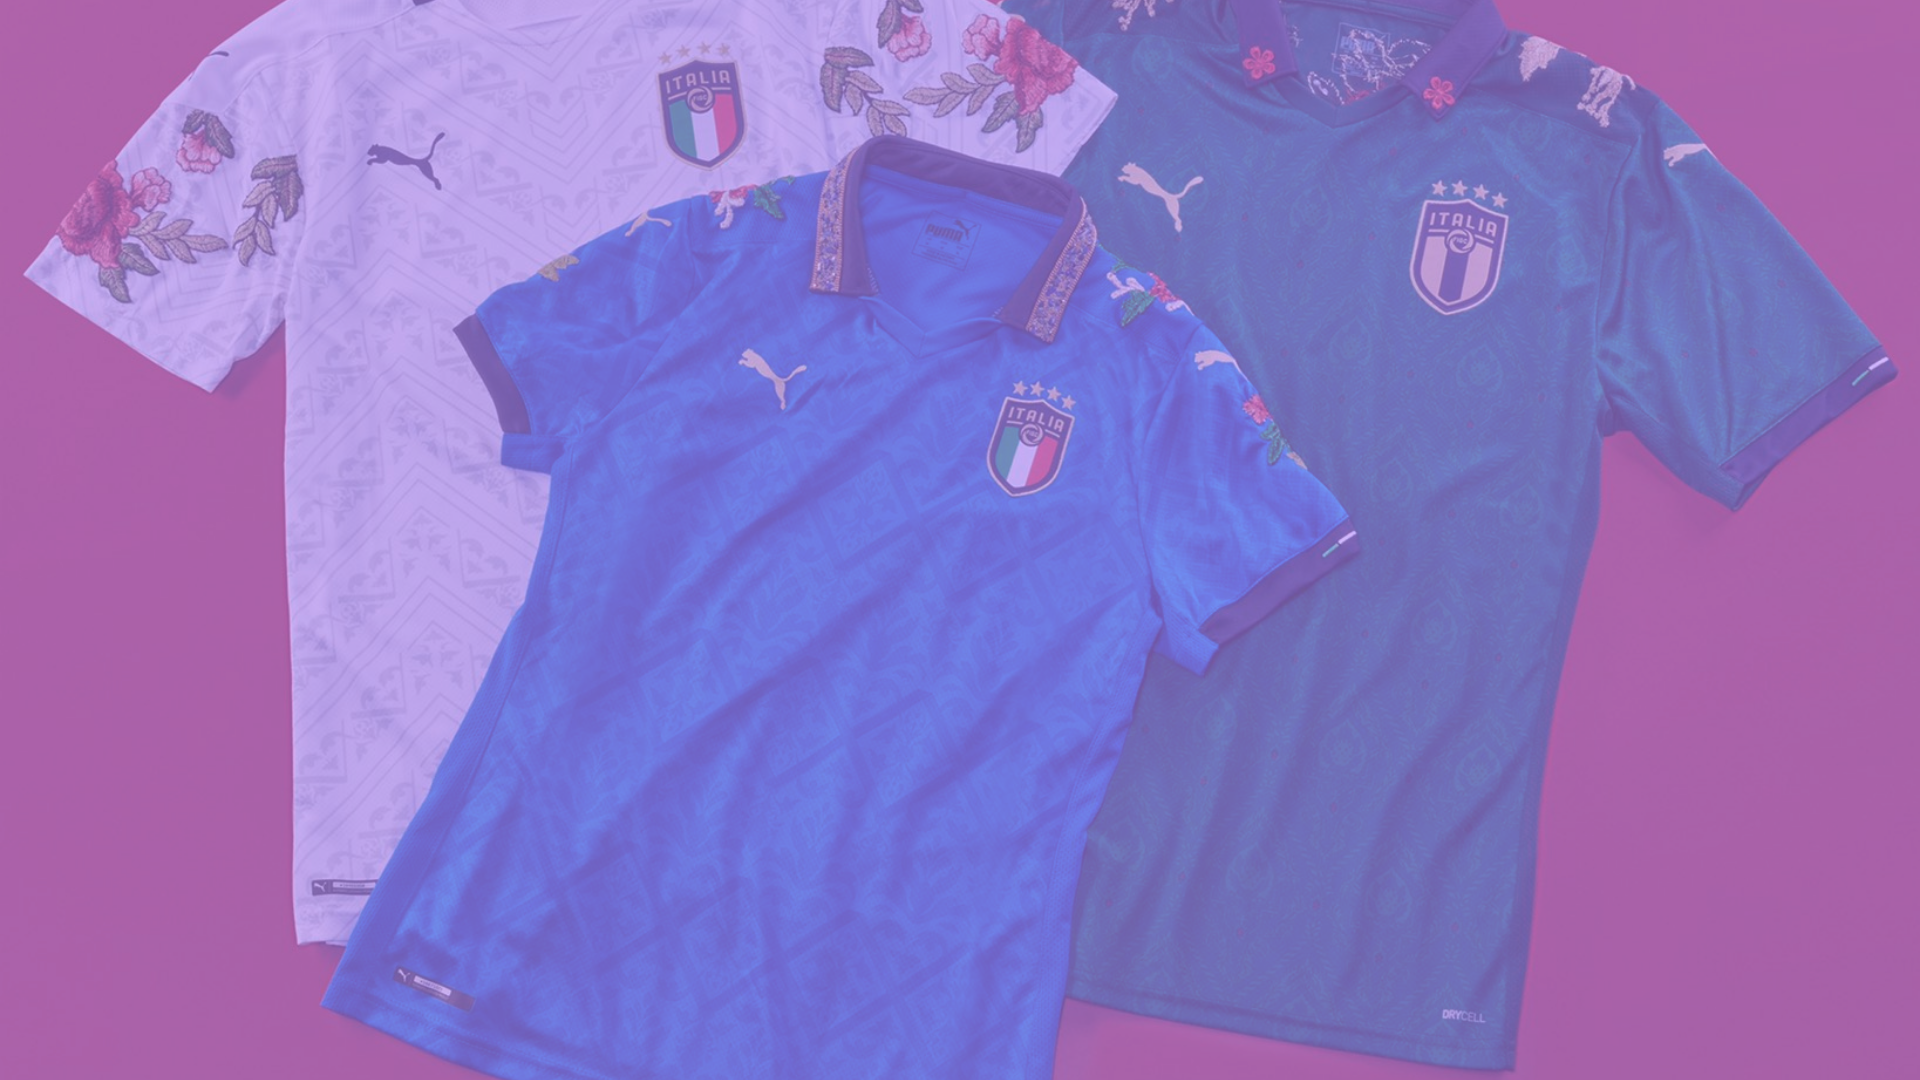 Embroidered Italy kits are beautiful